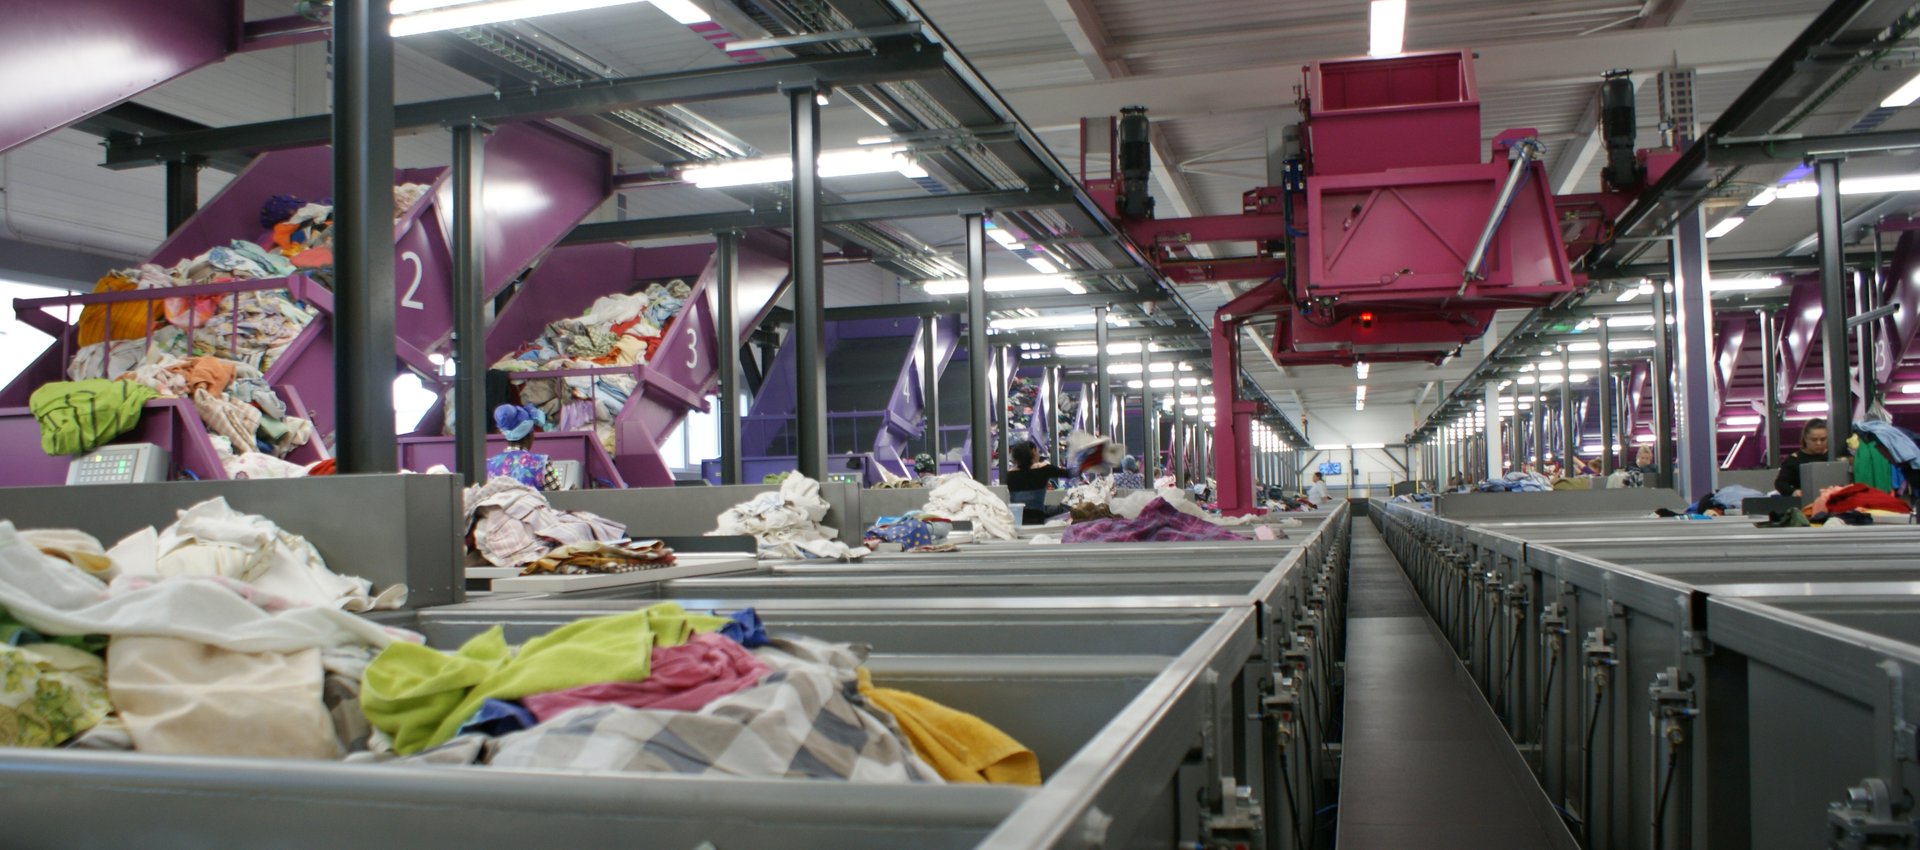 Textile recycling featured picture_2.JPG